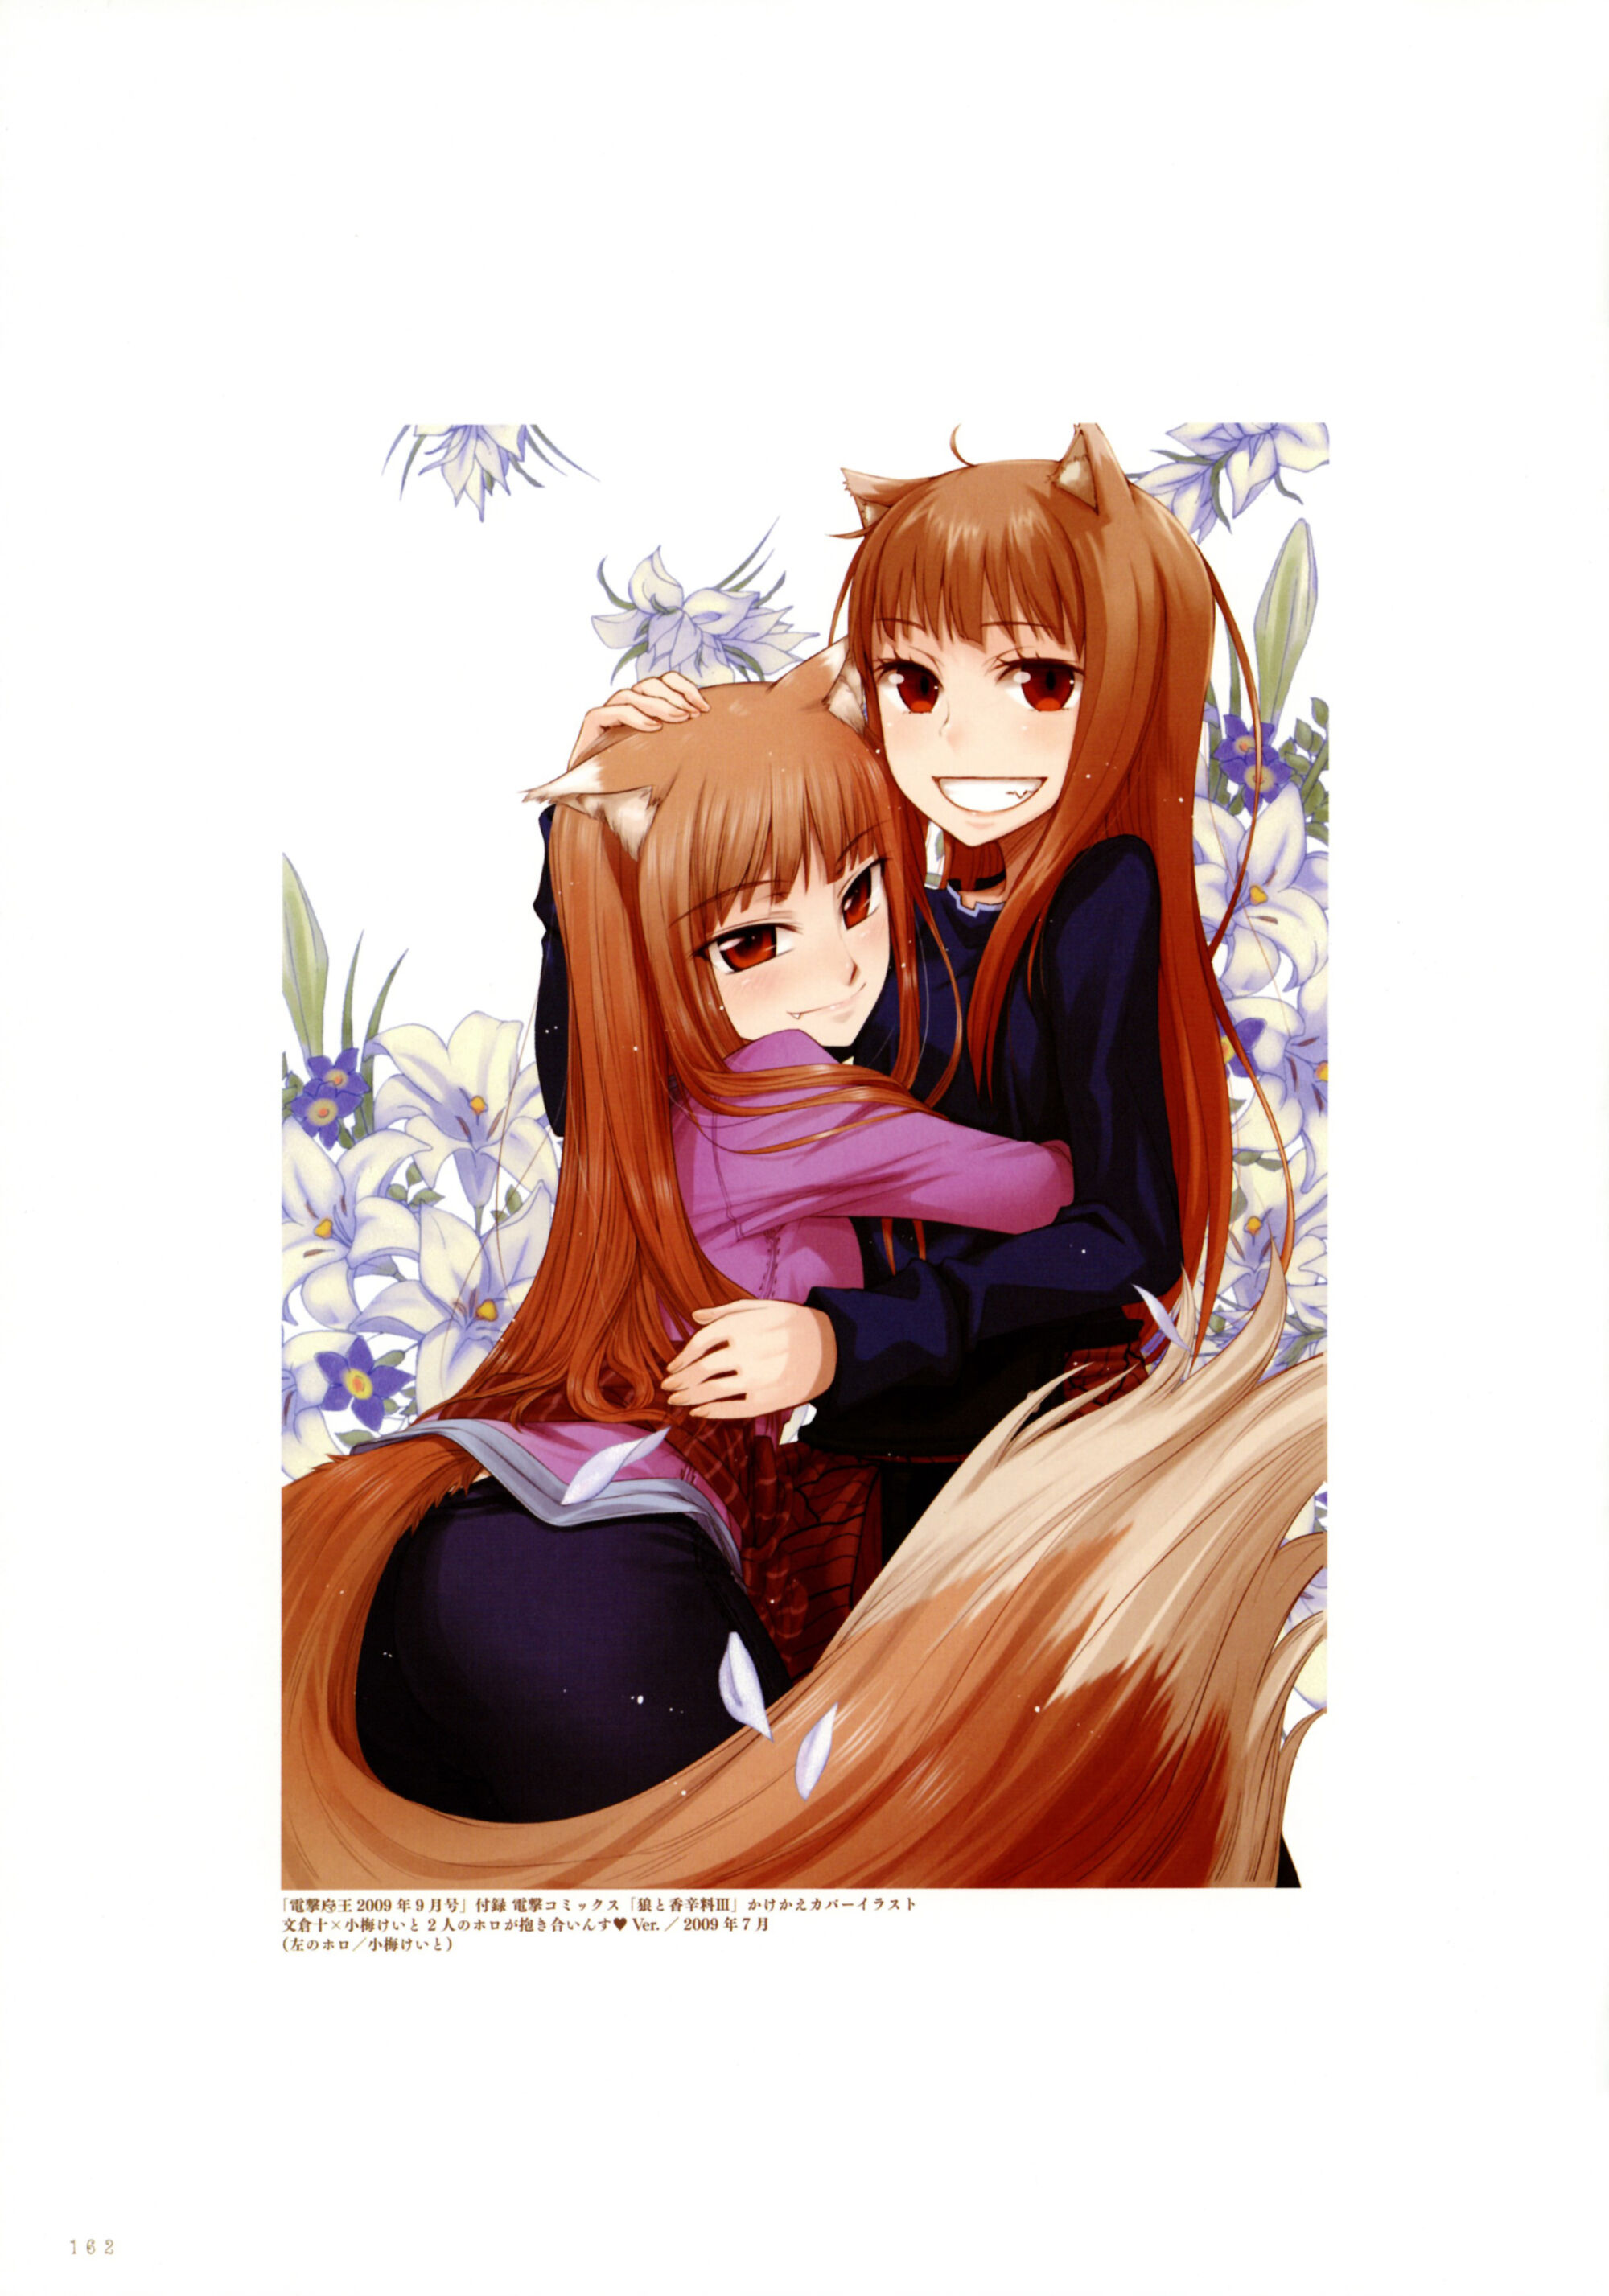 Spice and wolf holo and lawrence daughter